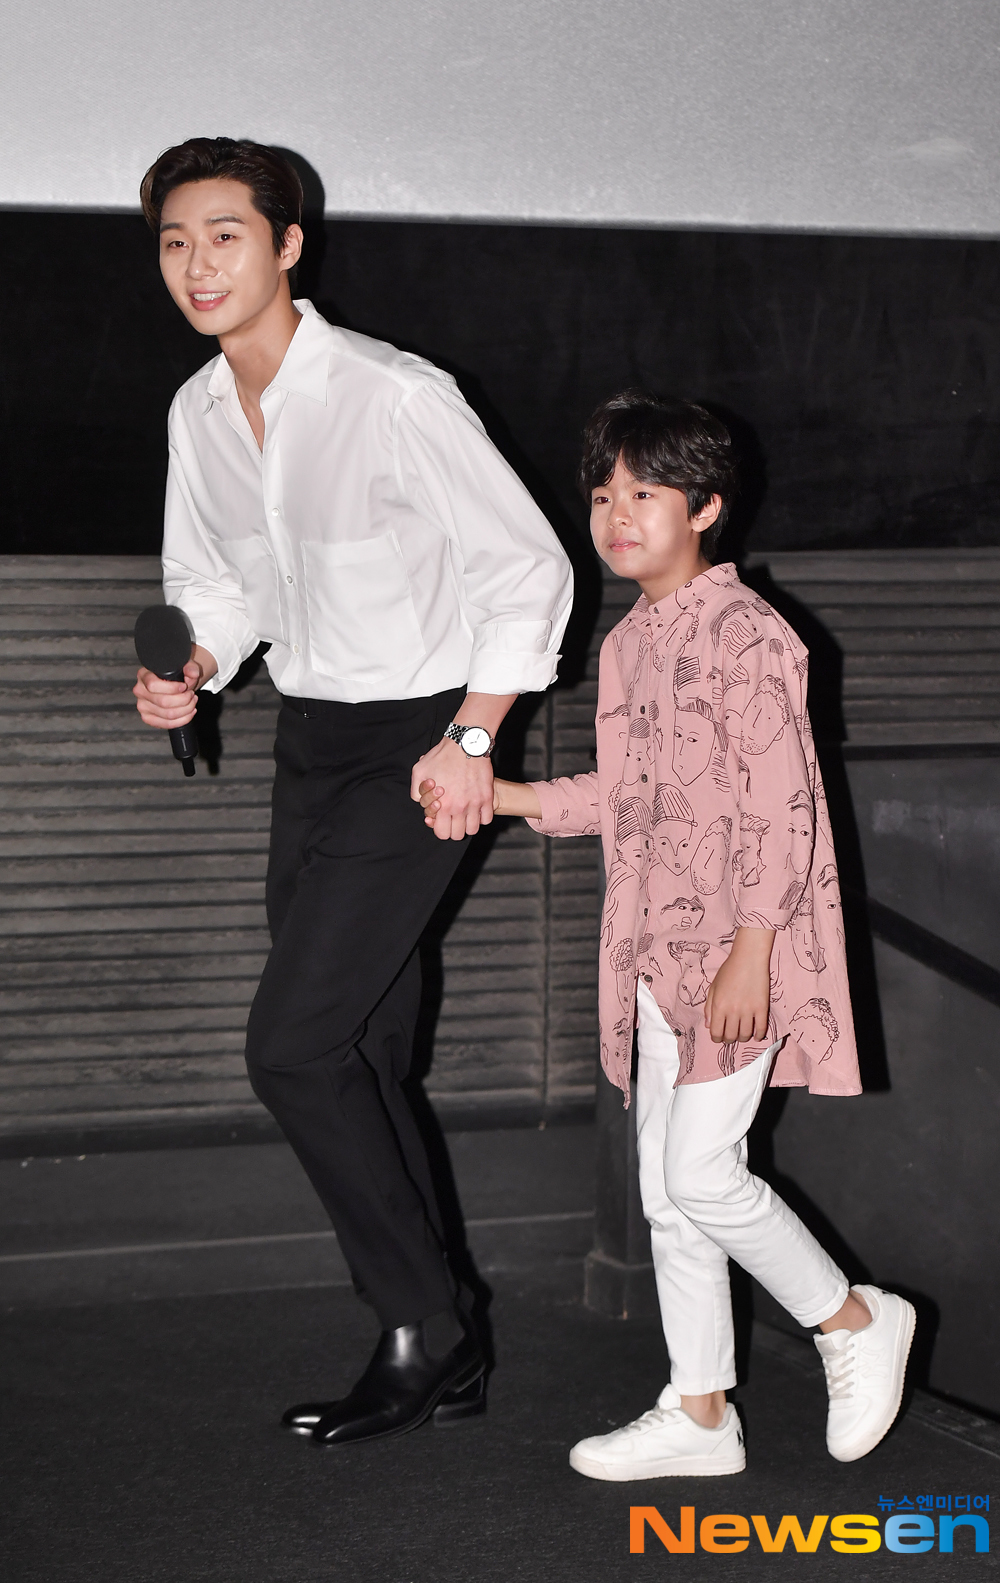 The movie Lion stage greeting was held at CGV Wangsimni in Seongdong-gu, Seoul on the afternoon of August 10Actor Park Seo-joon.Rain is entering the day.expressiveness